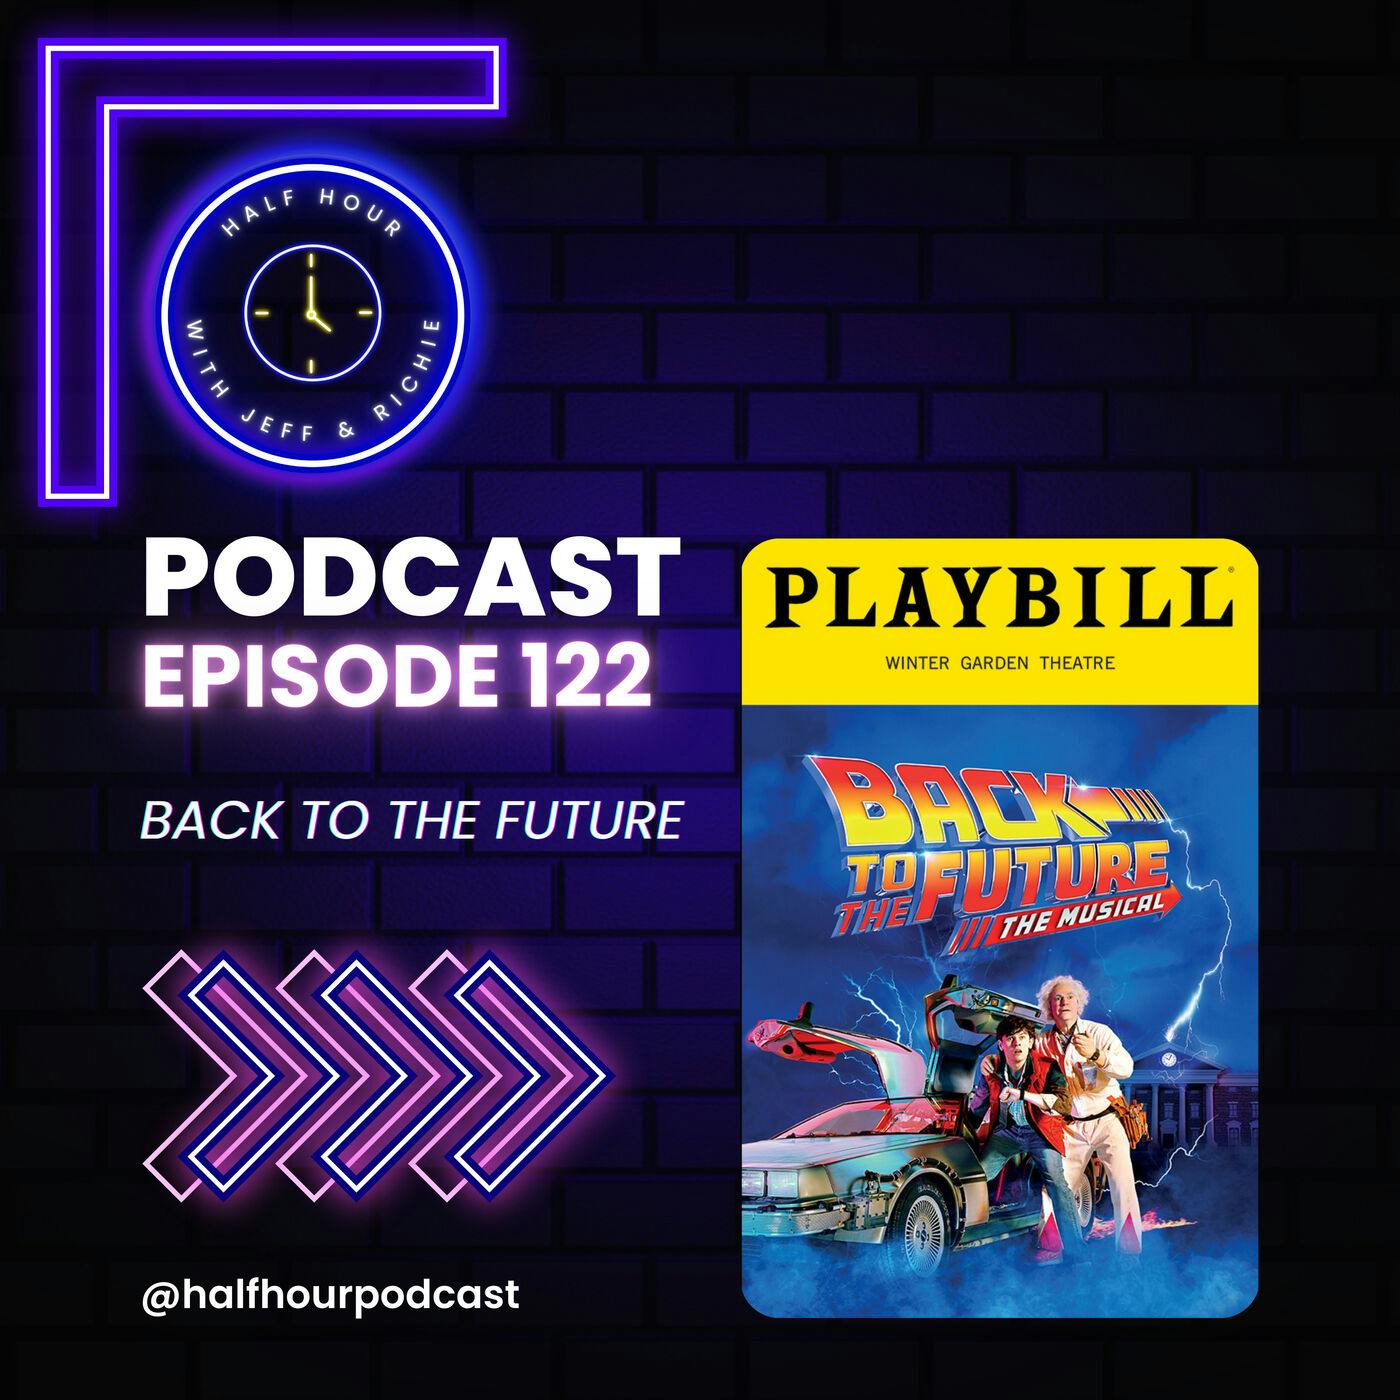 BACK TO THE FUTURE - A Post-Show Broadway Analysis